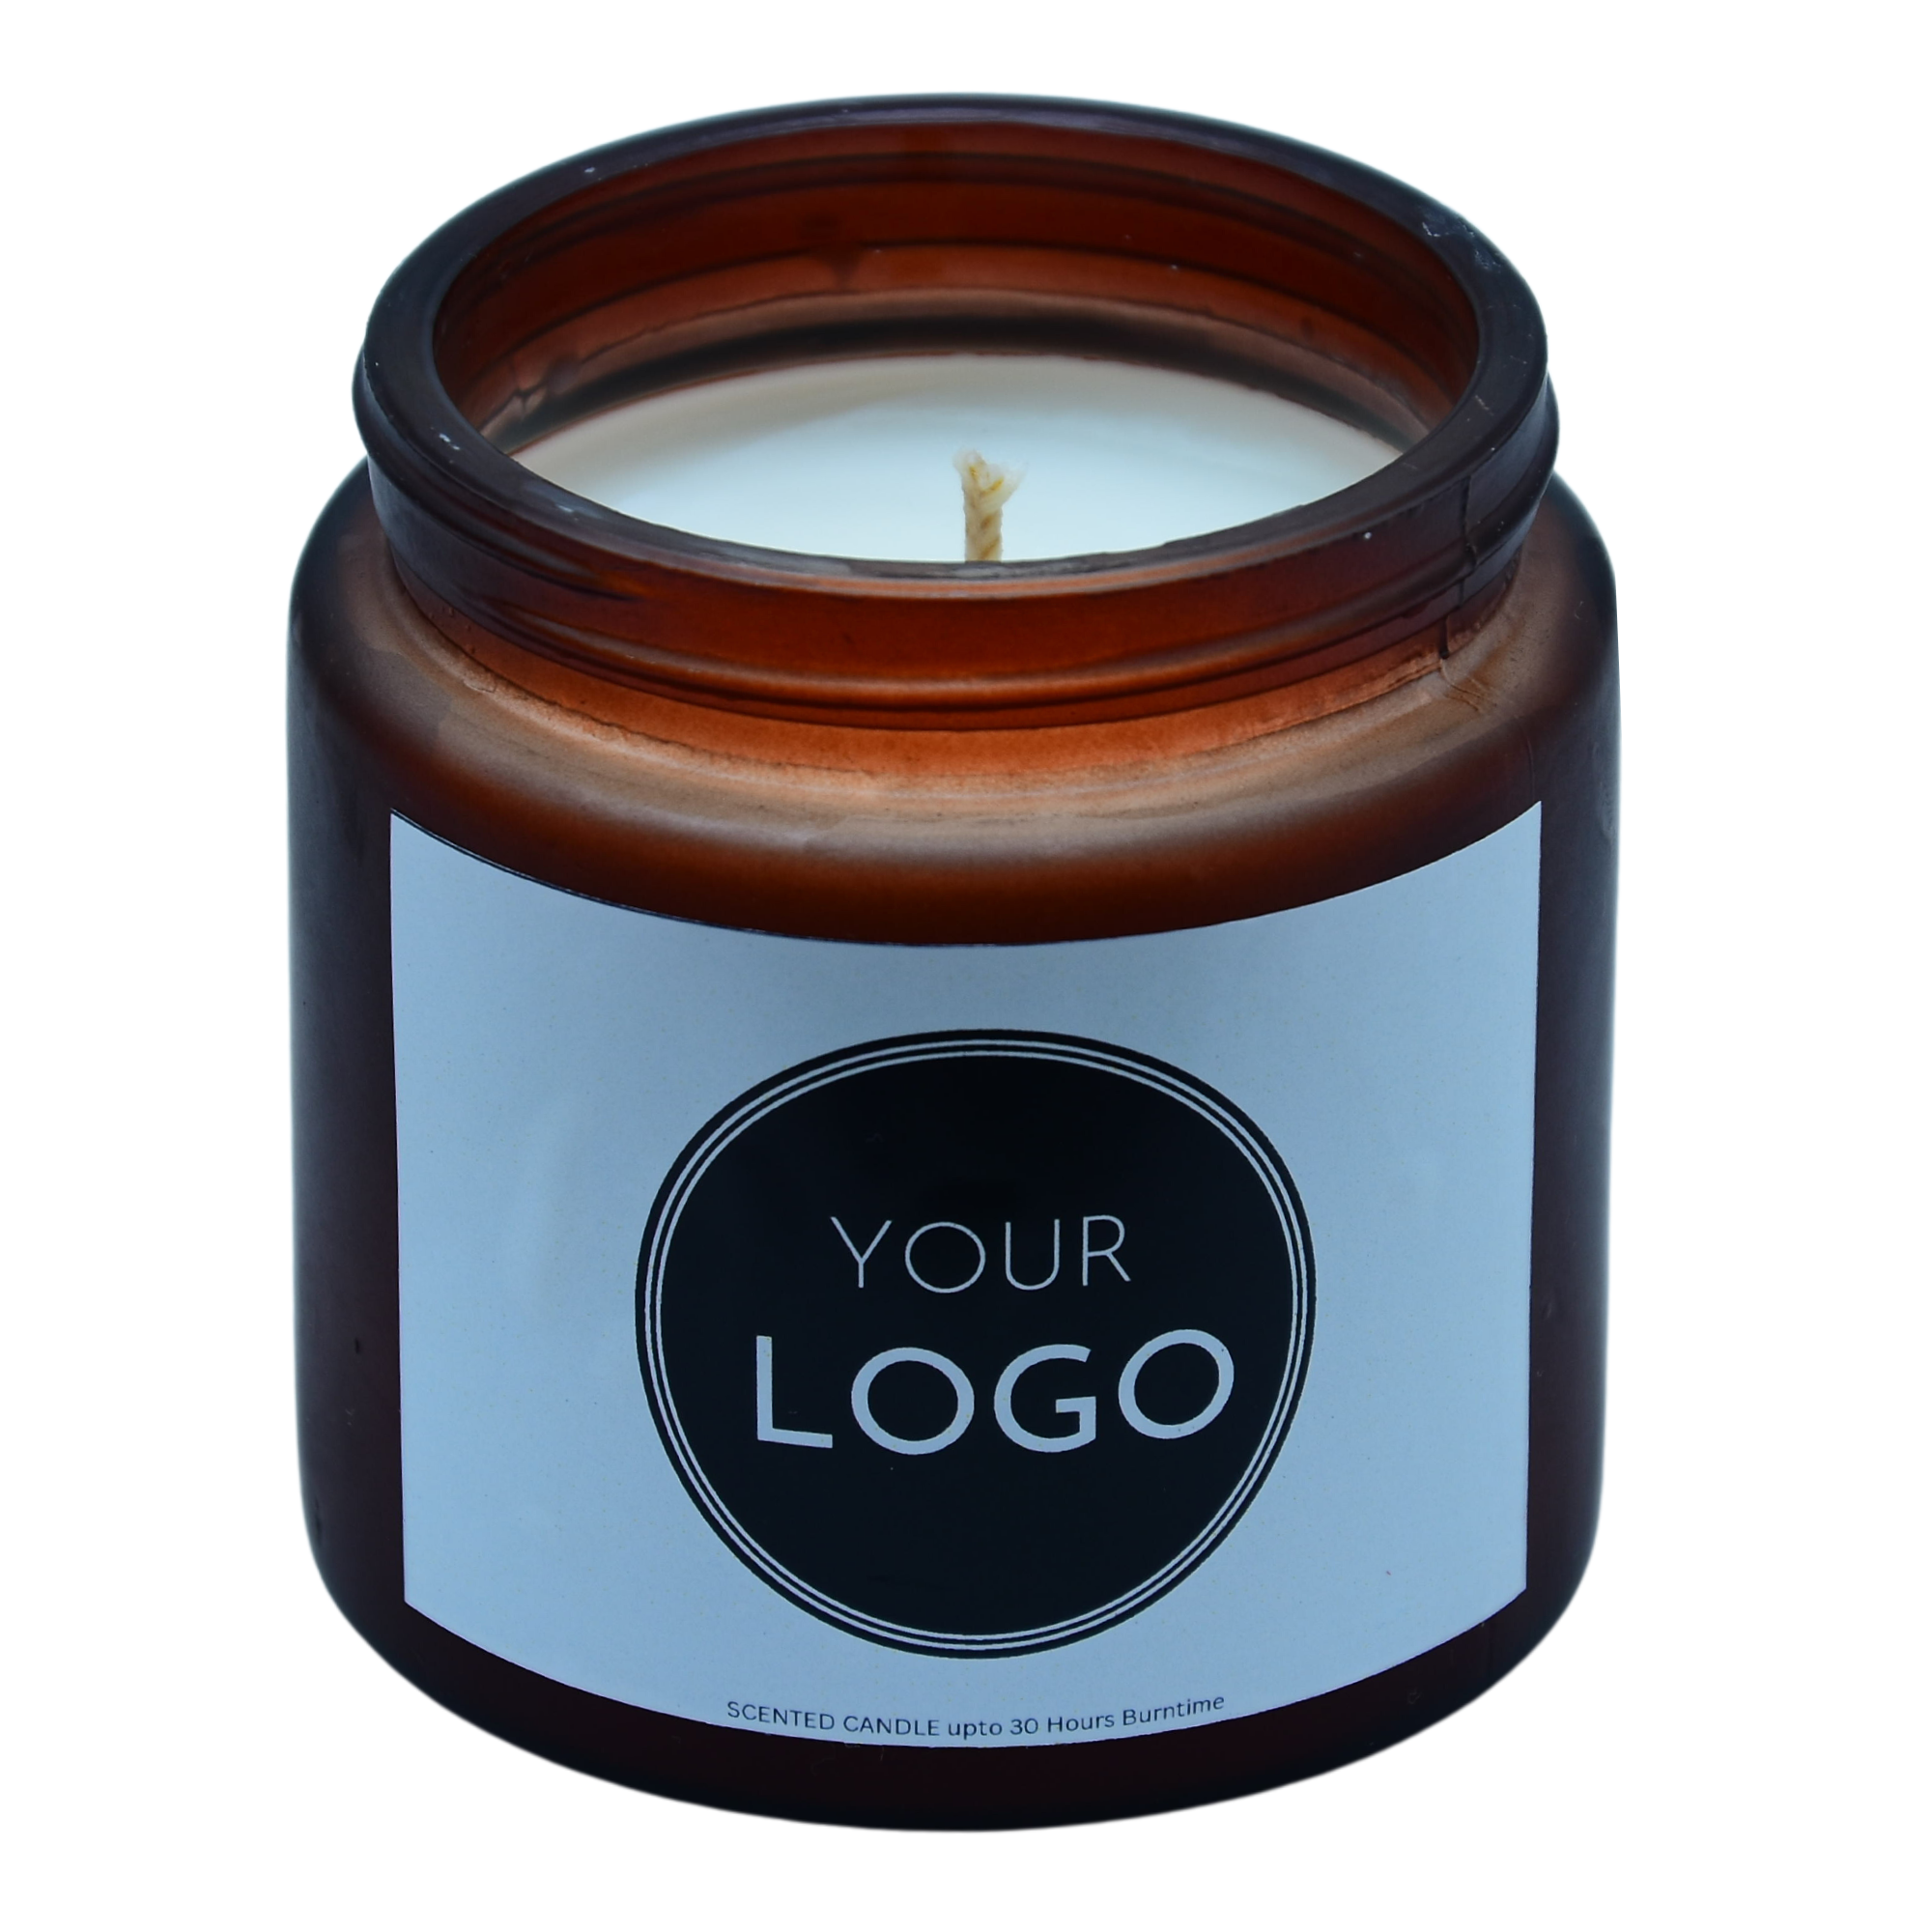 Private label candle manufacturing